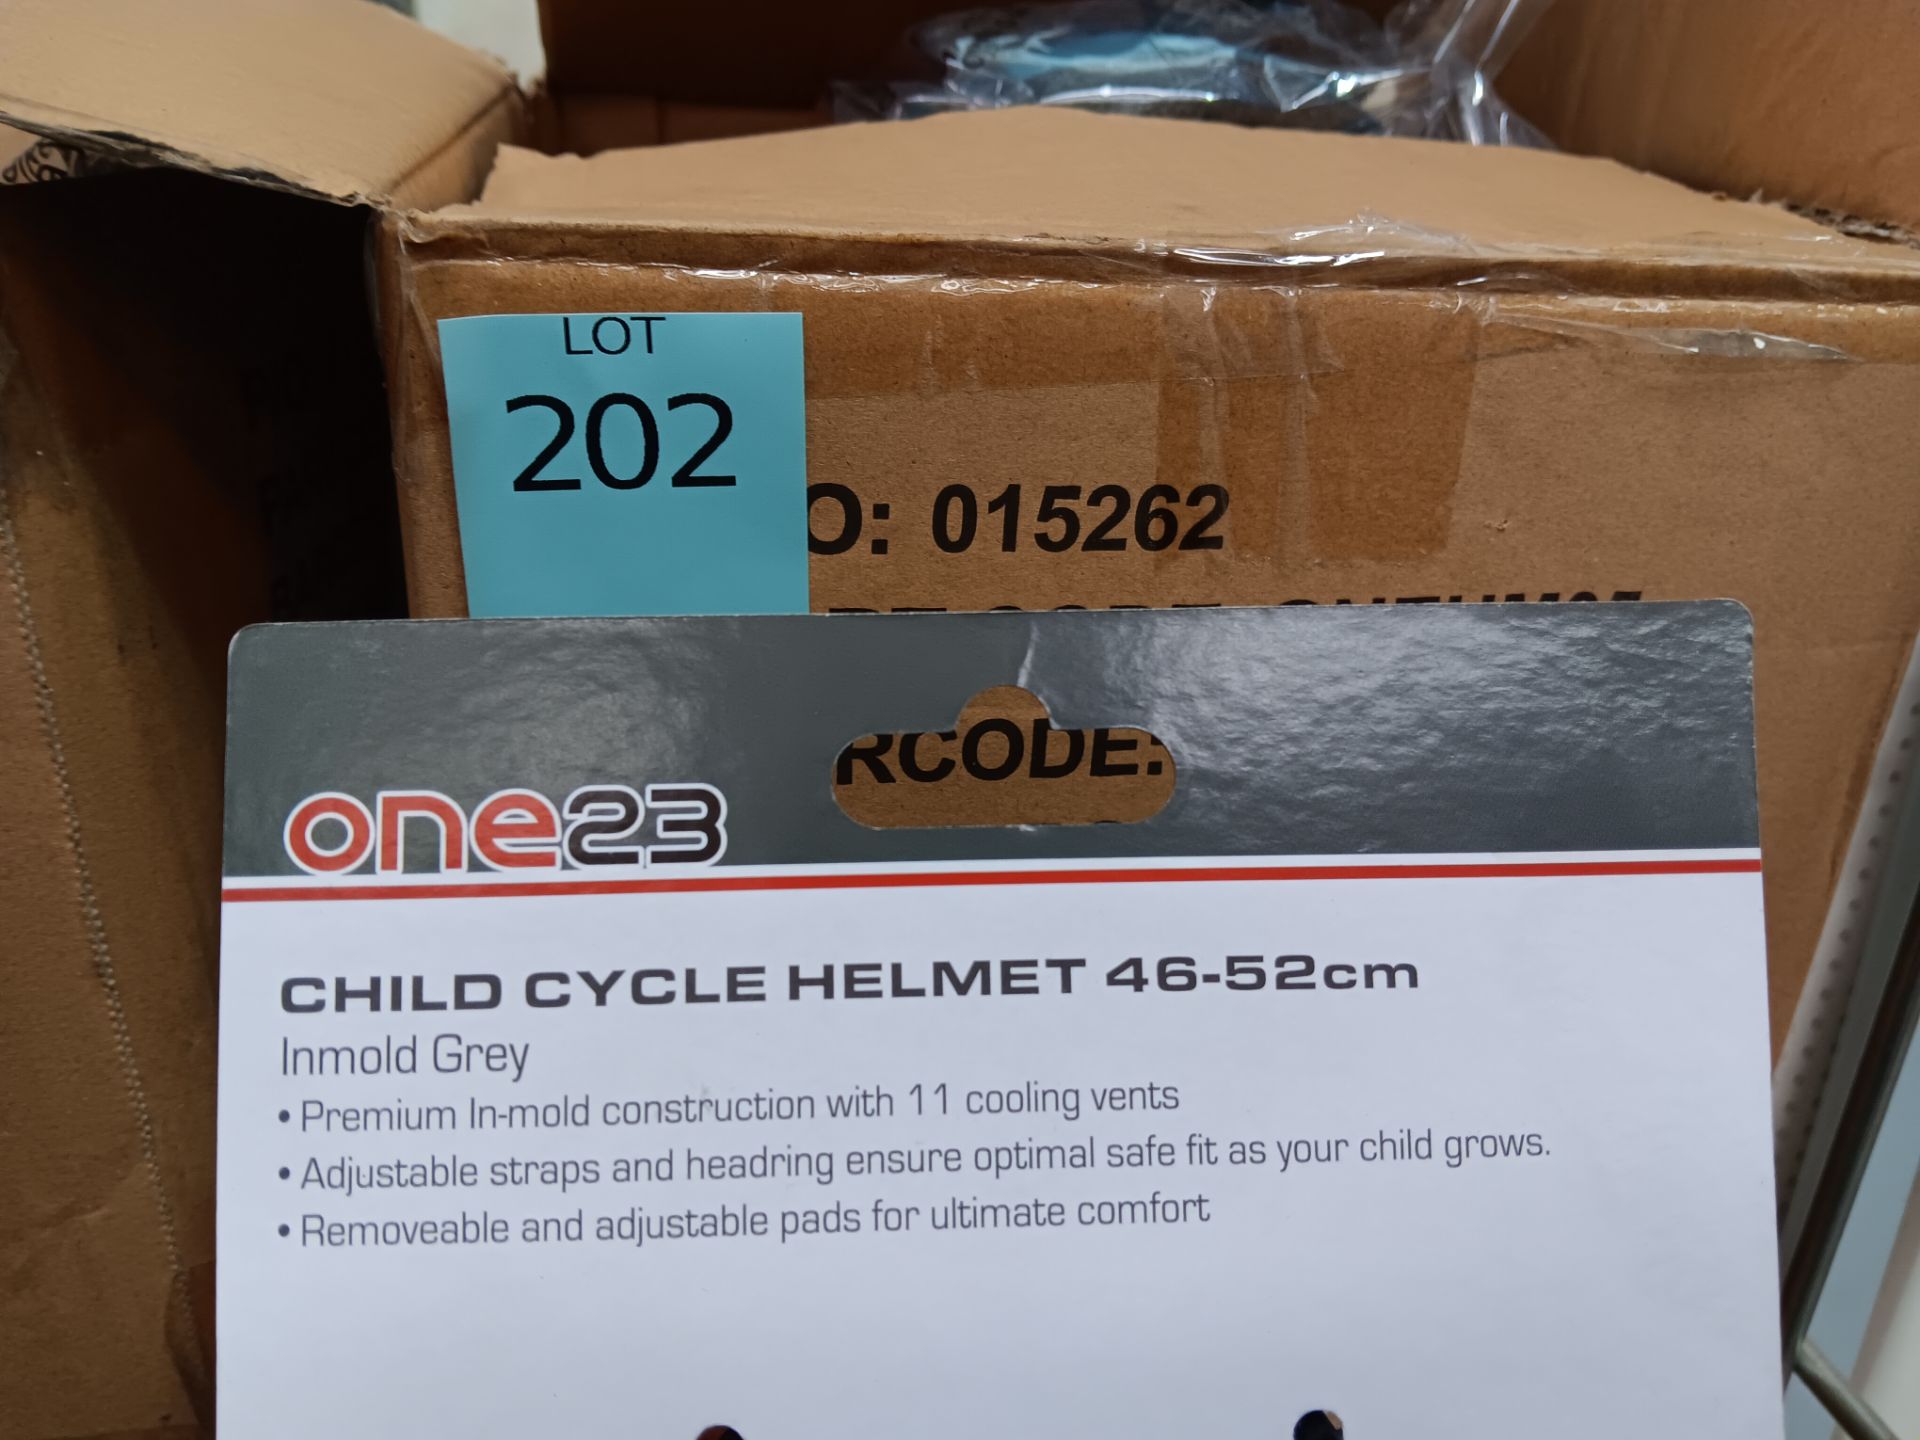 22 x One23 Y-42XS Child Cycle Helmet, Inmold Grey (Size 46-52) (Trolley cage not included) - Image 3 of 3